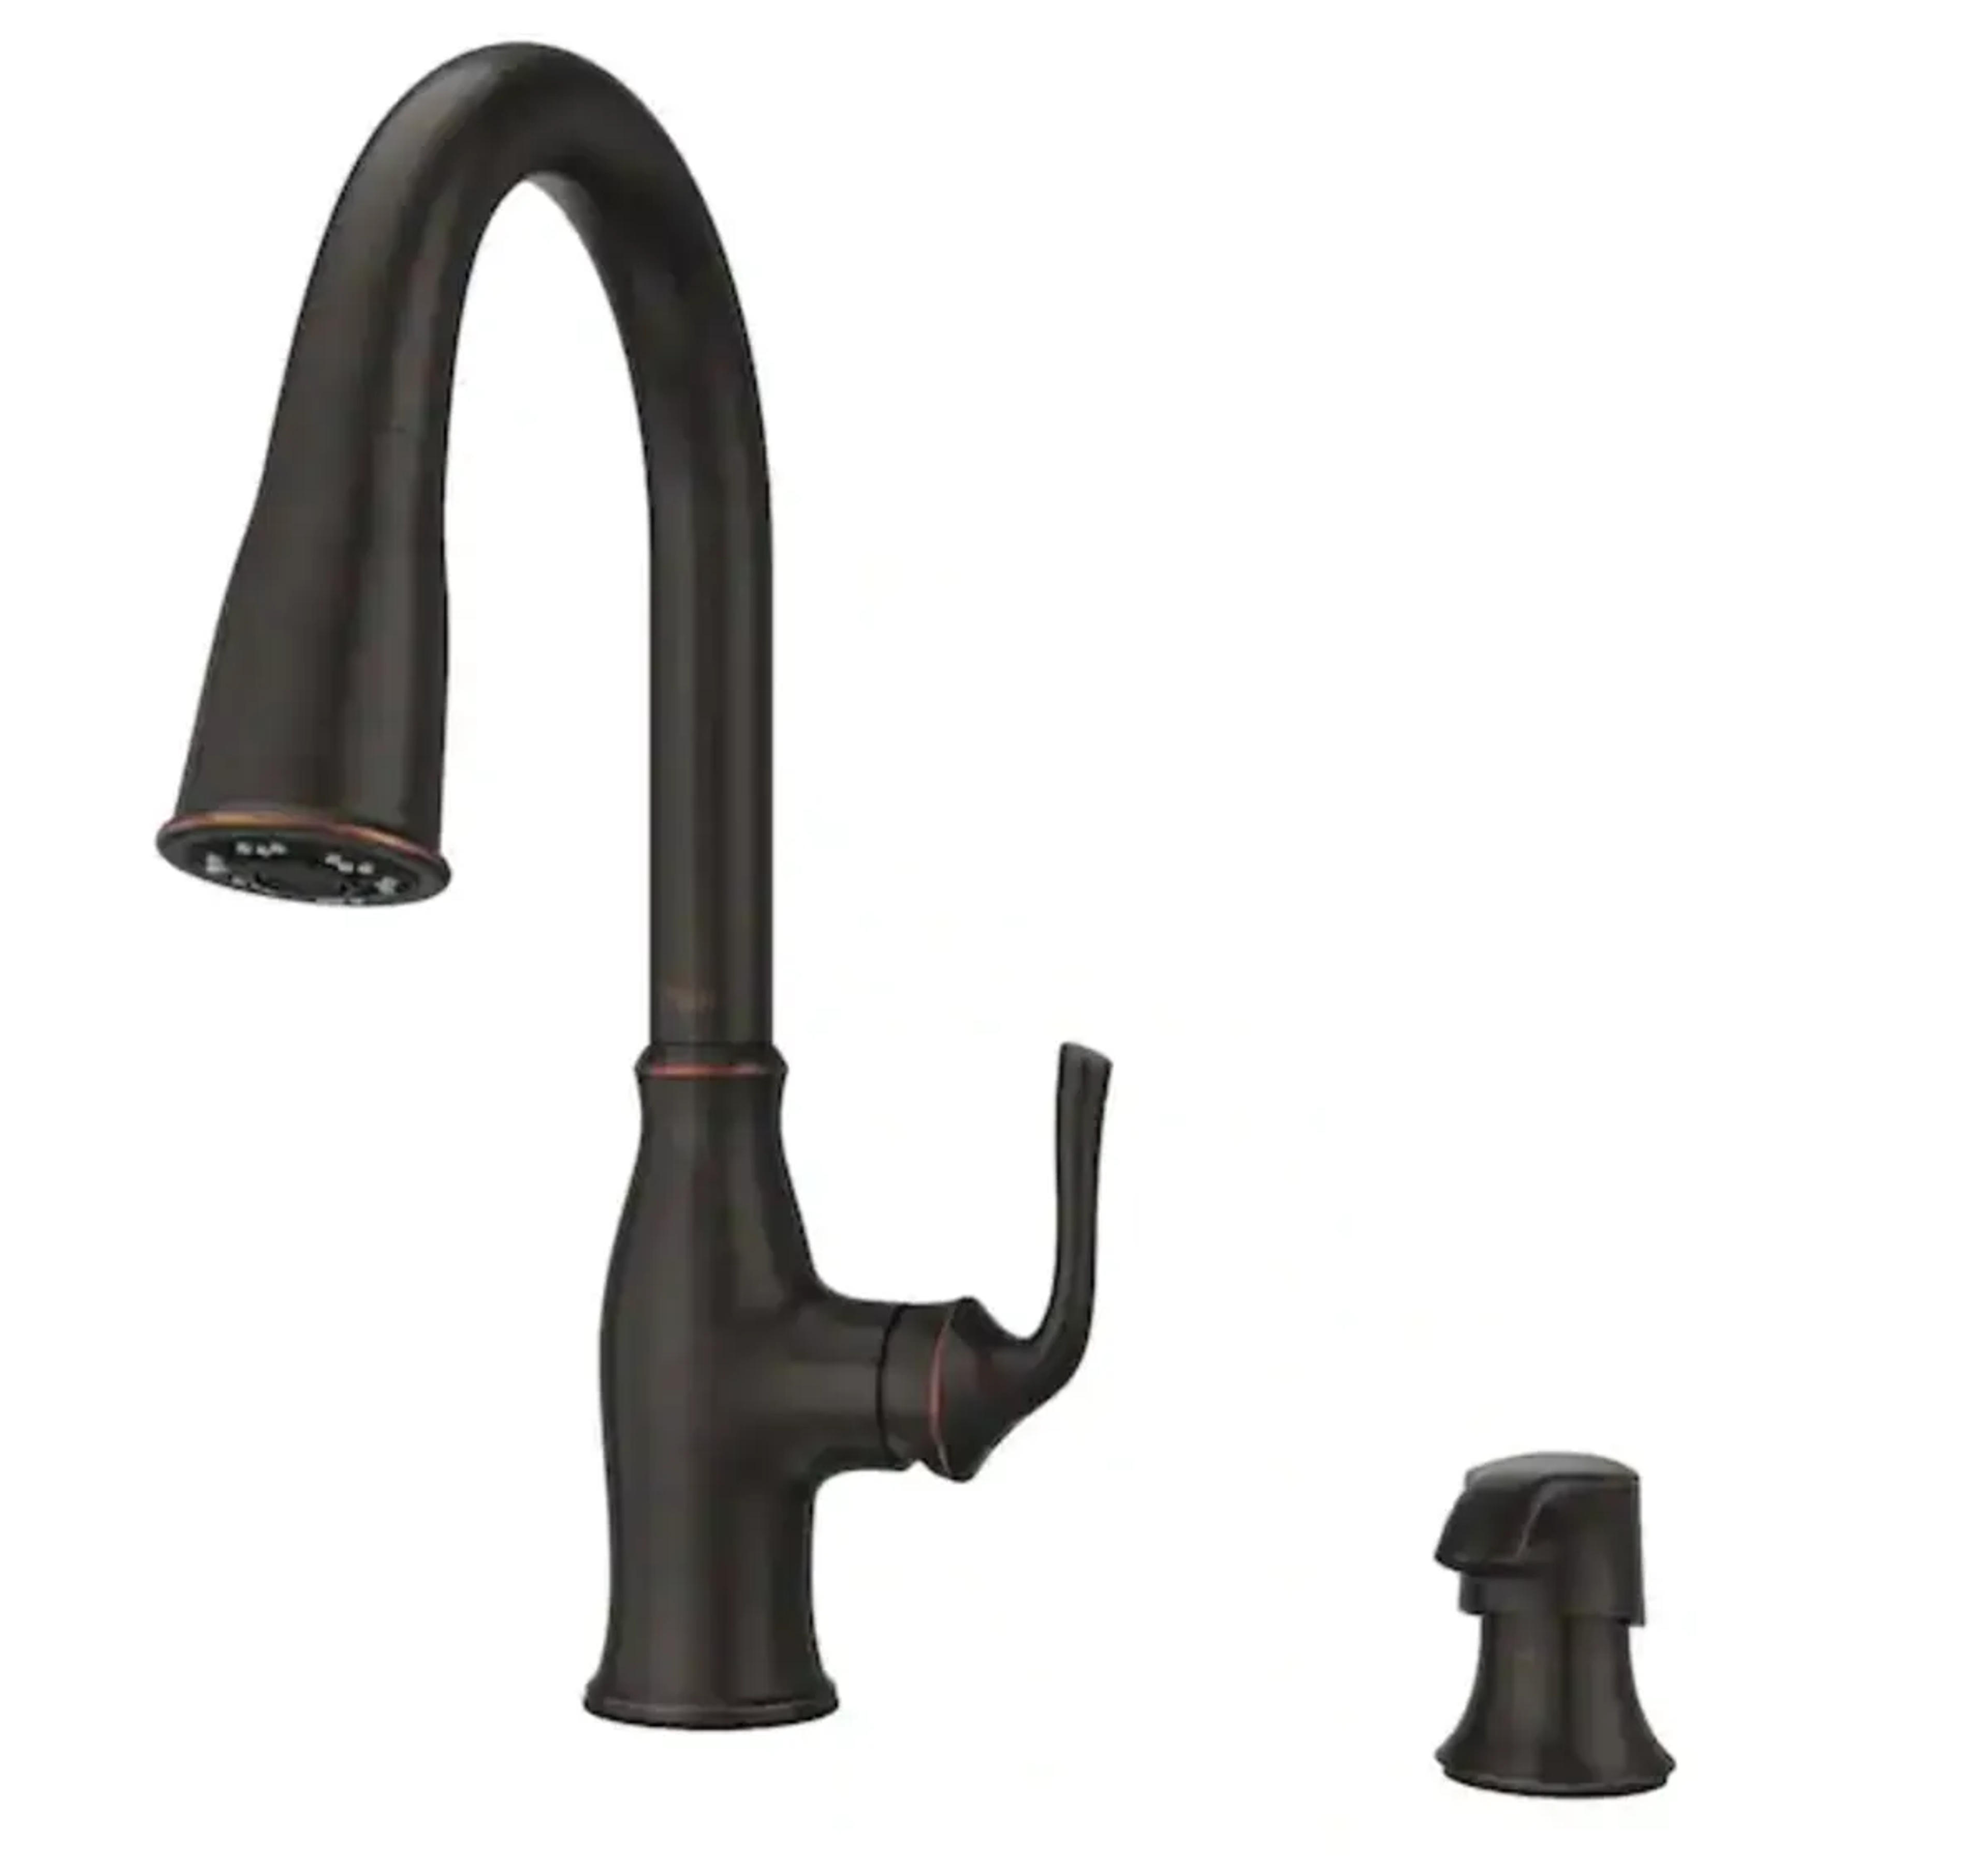 Pfister Rosslyn Single Handle Pull Down Sprayer Kitchen Faucet with Deckplate Included in Tuscan Bronze F-529-7RSSRY - The Home Depot